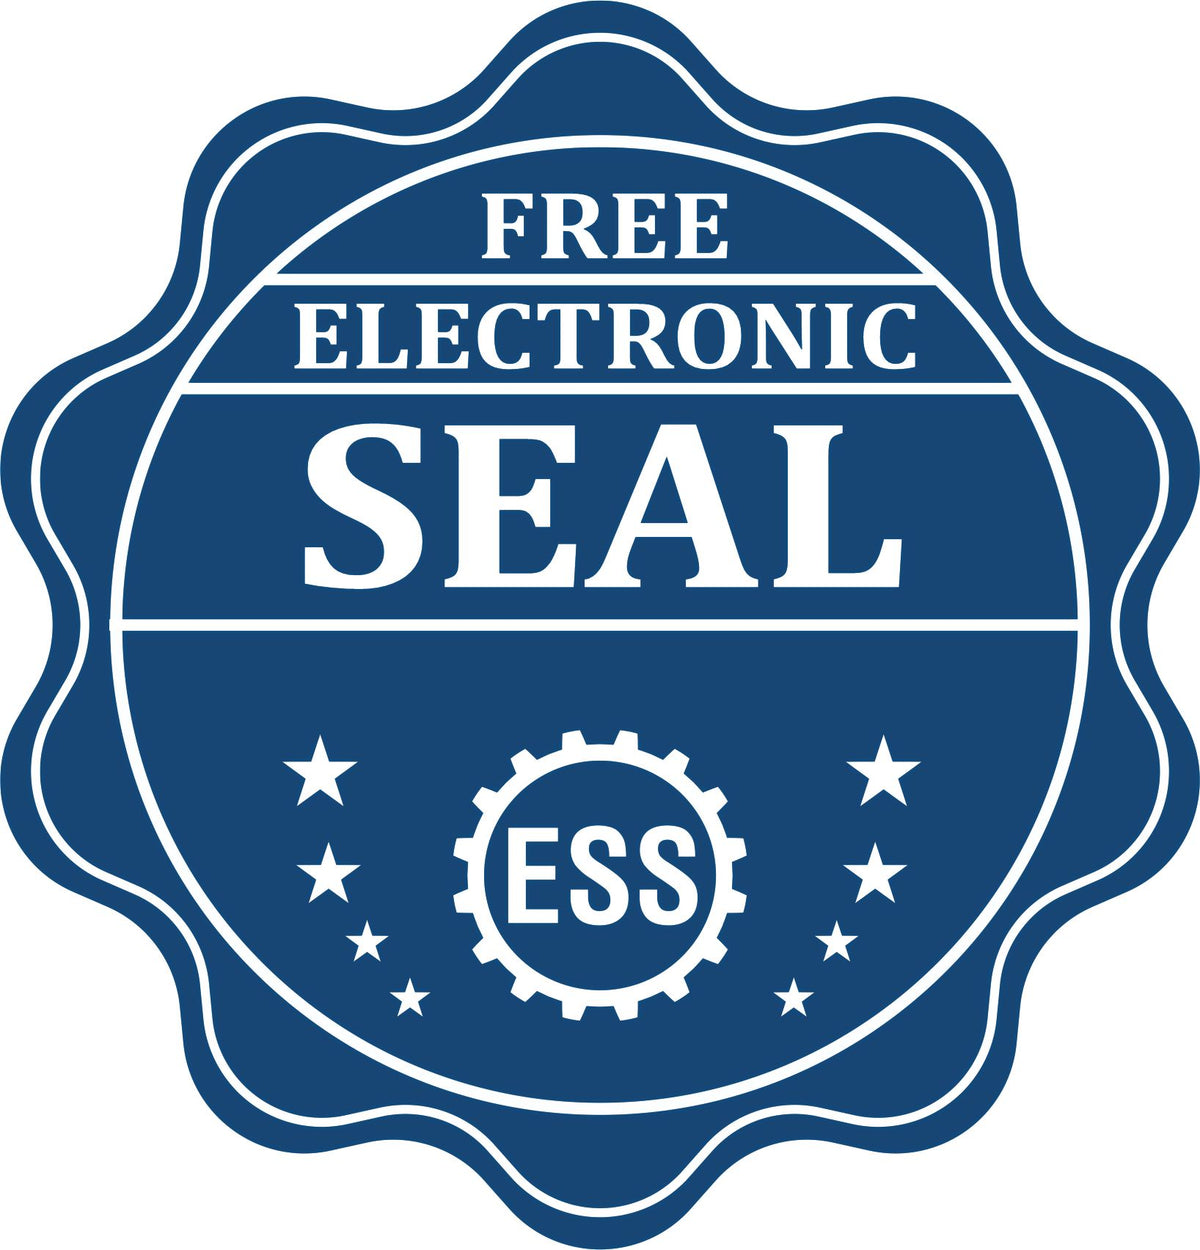 A badge showing a free electronic seal for the Gift Guam Geologist Seal with stars and the ESS gear on the emblem.